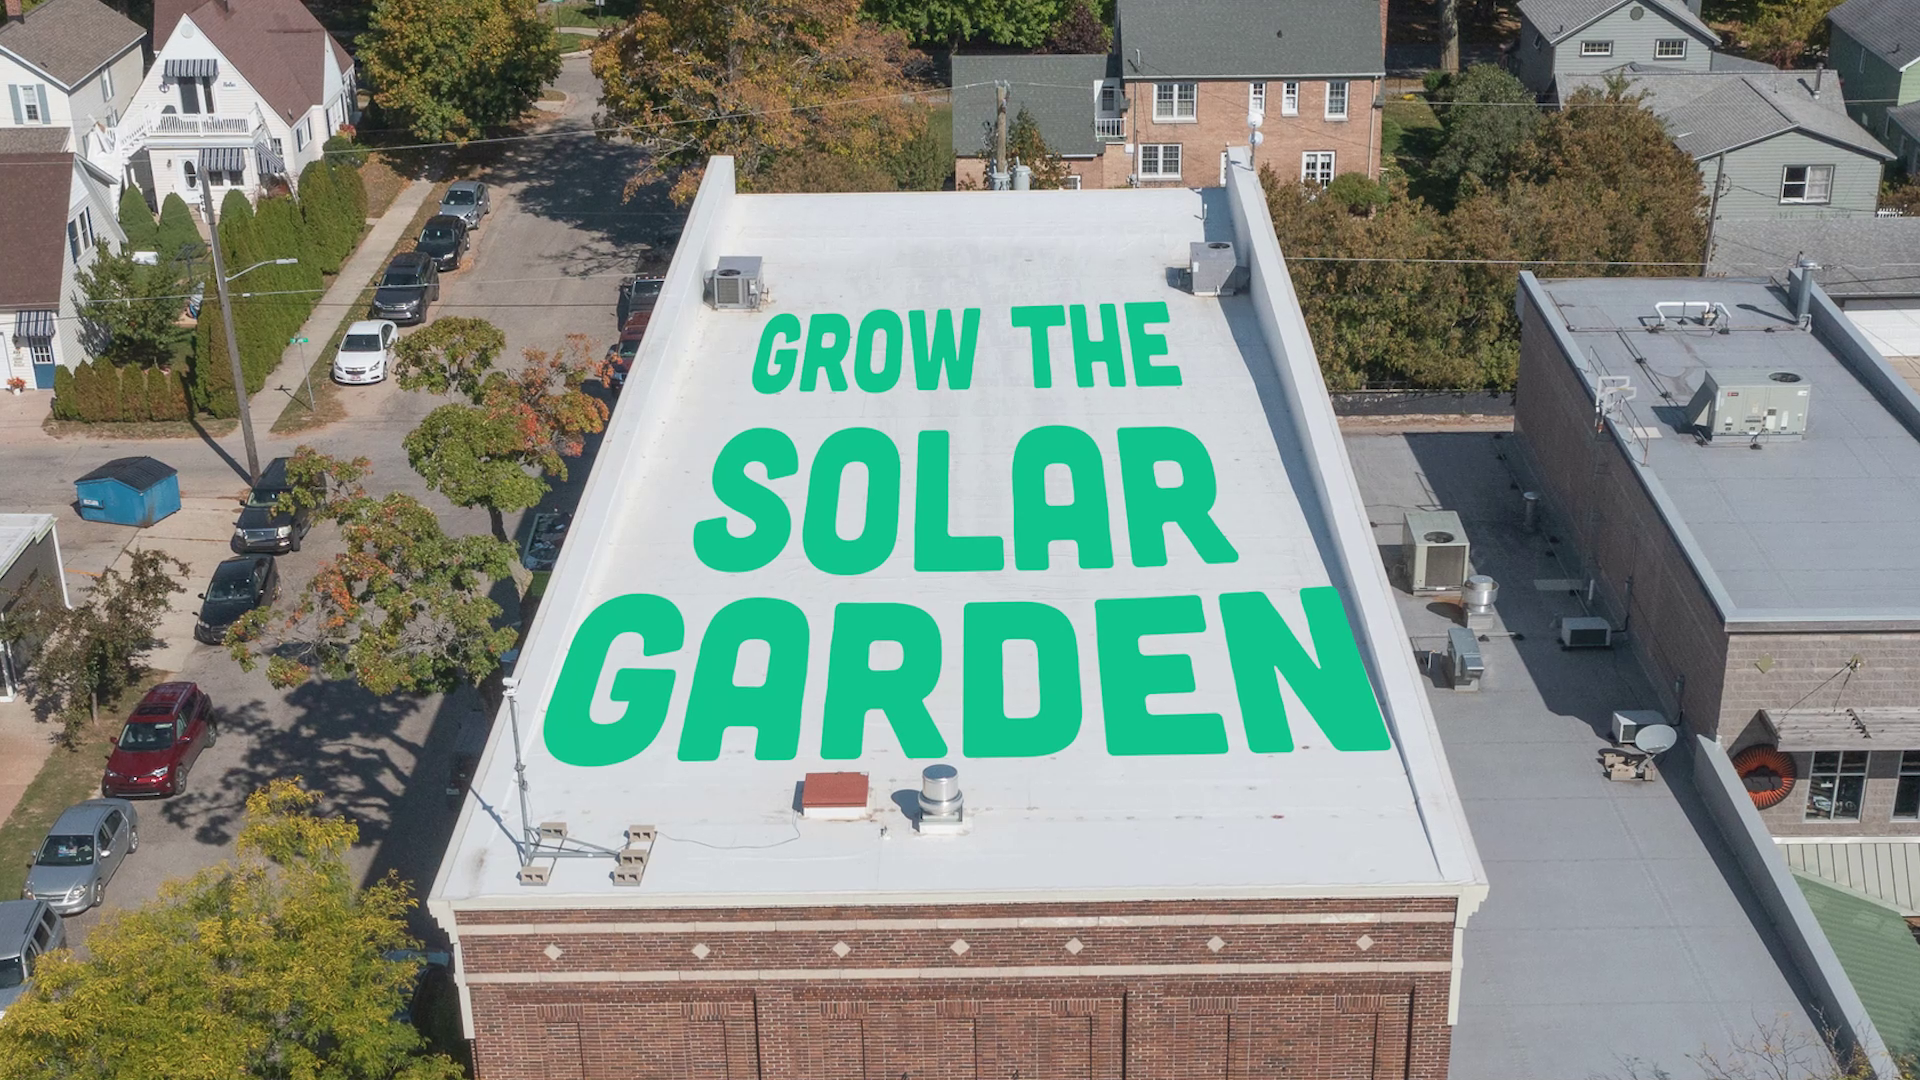 Garden Theater in Frankfort plans to transition to solar energy